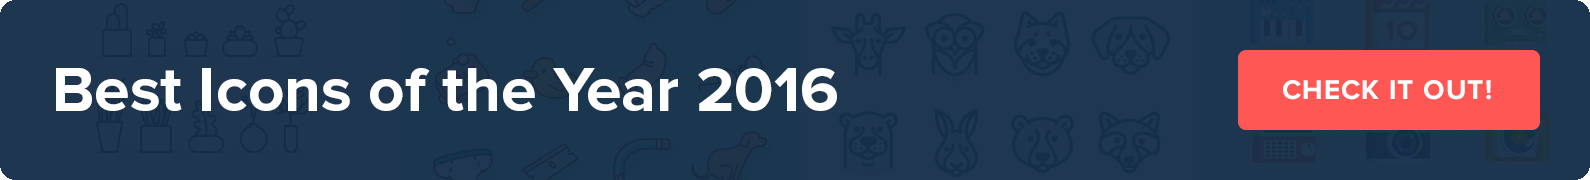 best-icons-of-the-year-2016